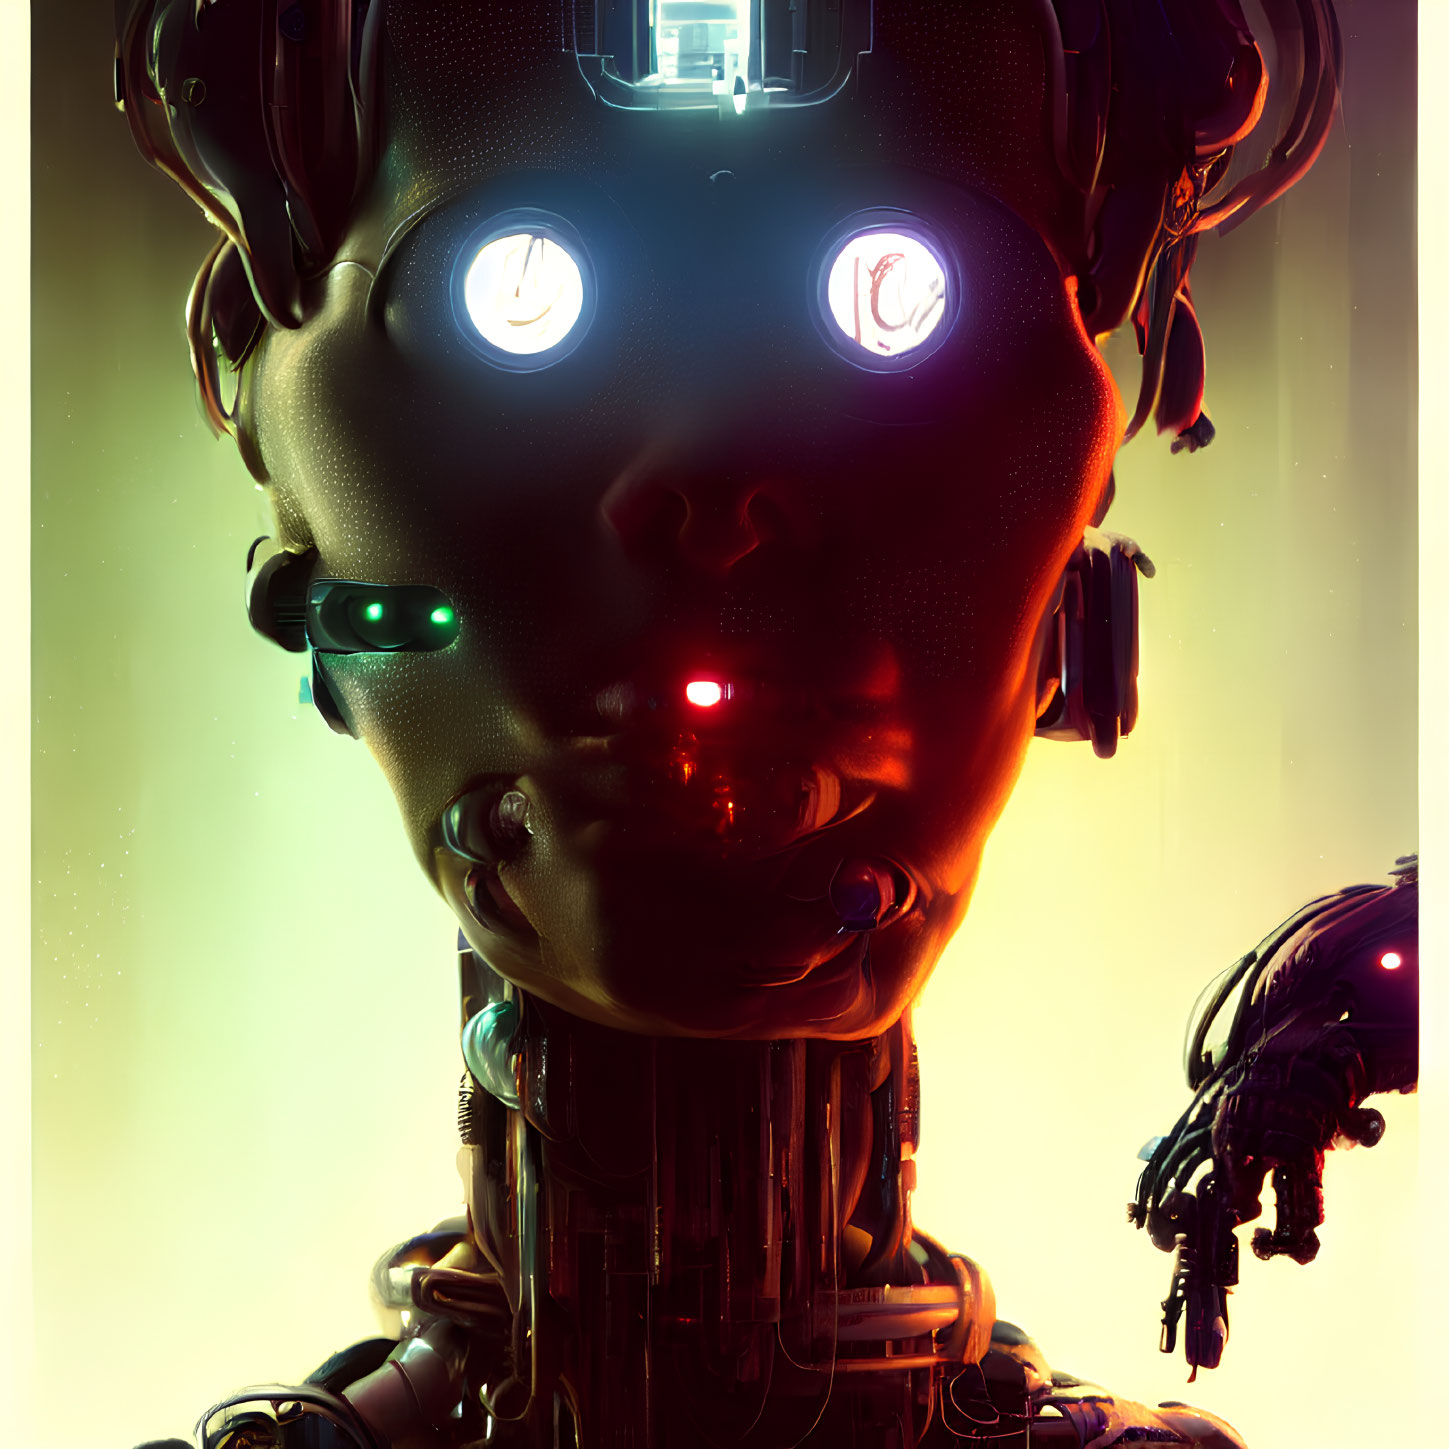 Detailed Close-Up of Futuristic Robot with Human-Like Face